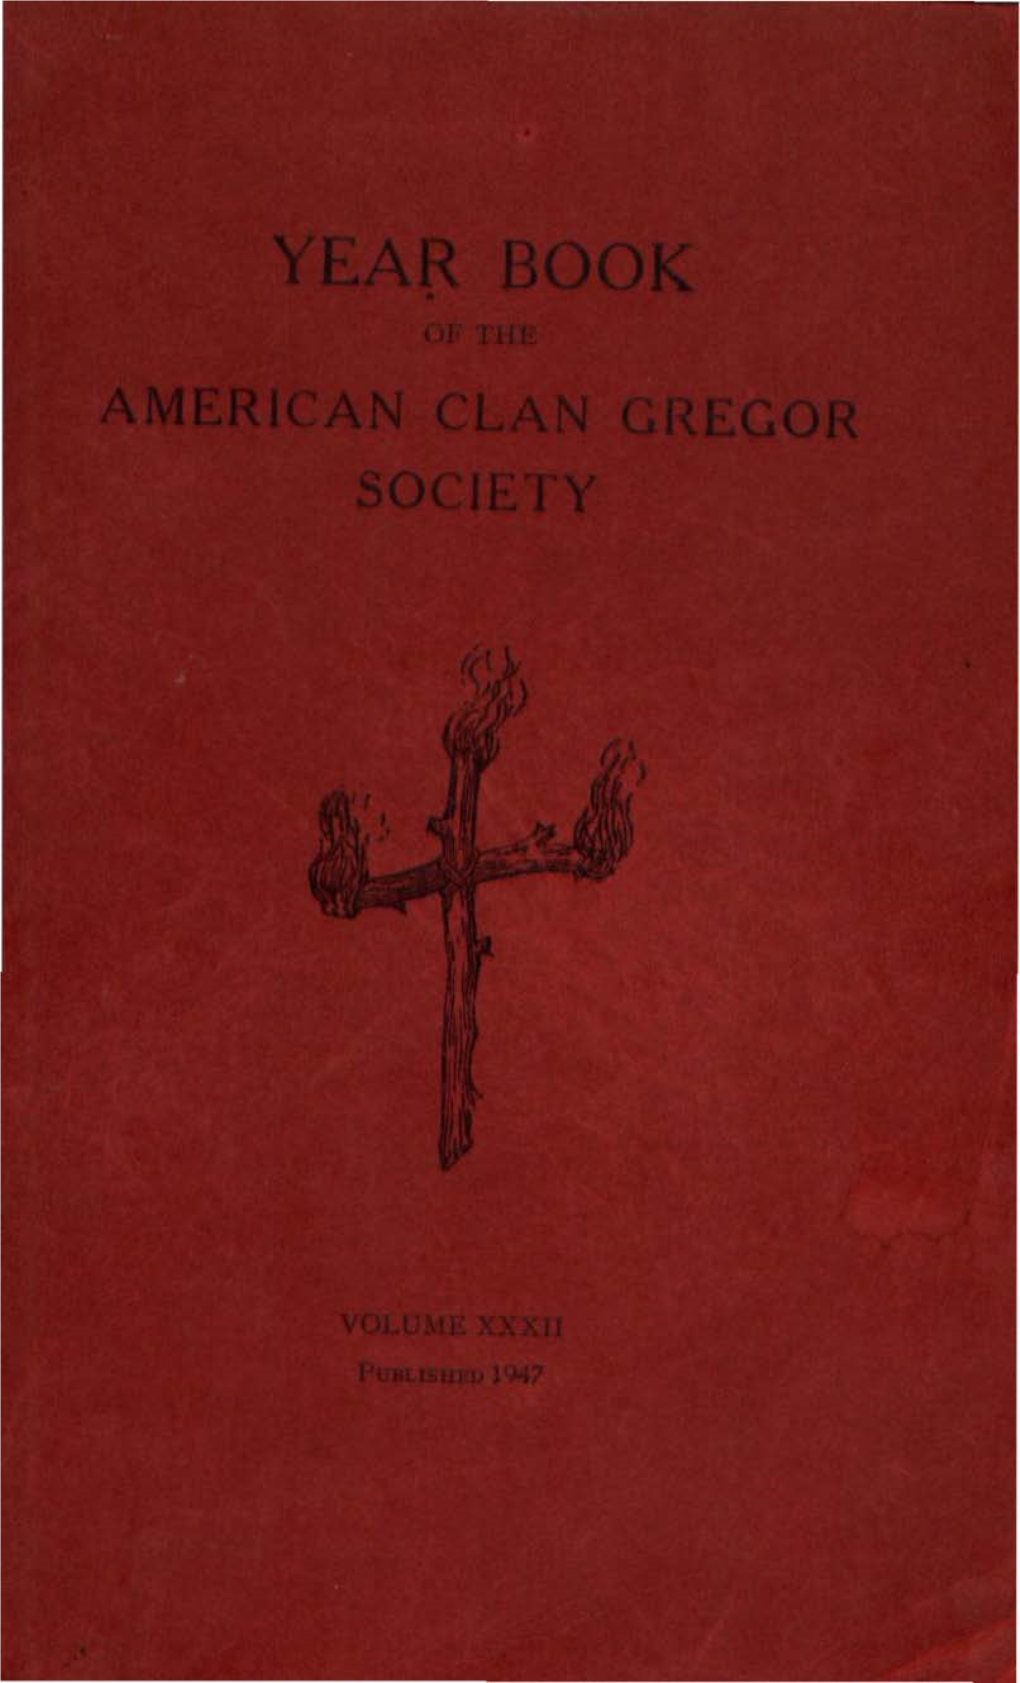 American Clan Gregor Society CONTA in ING the PROCEEDINGS of the 1946 ANNUAL GATHERING